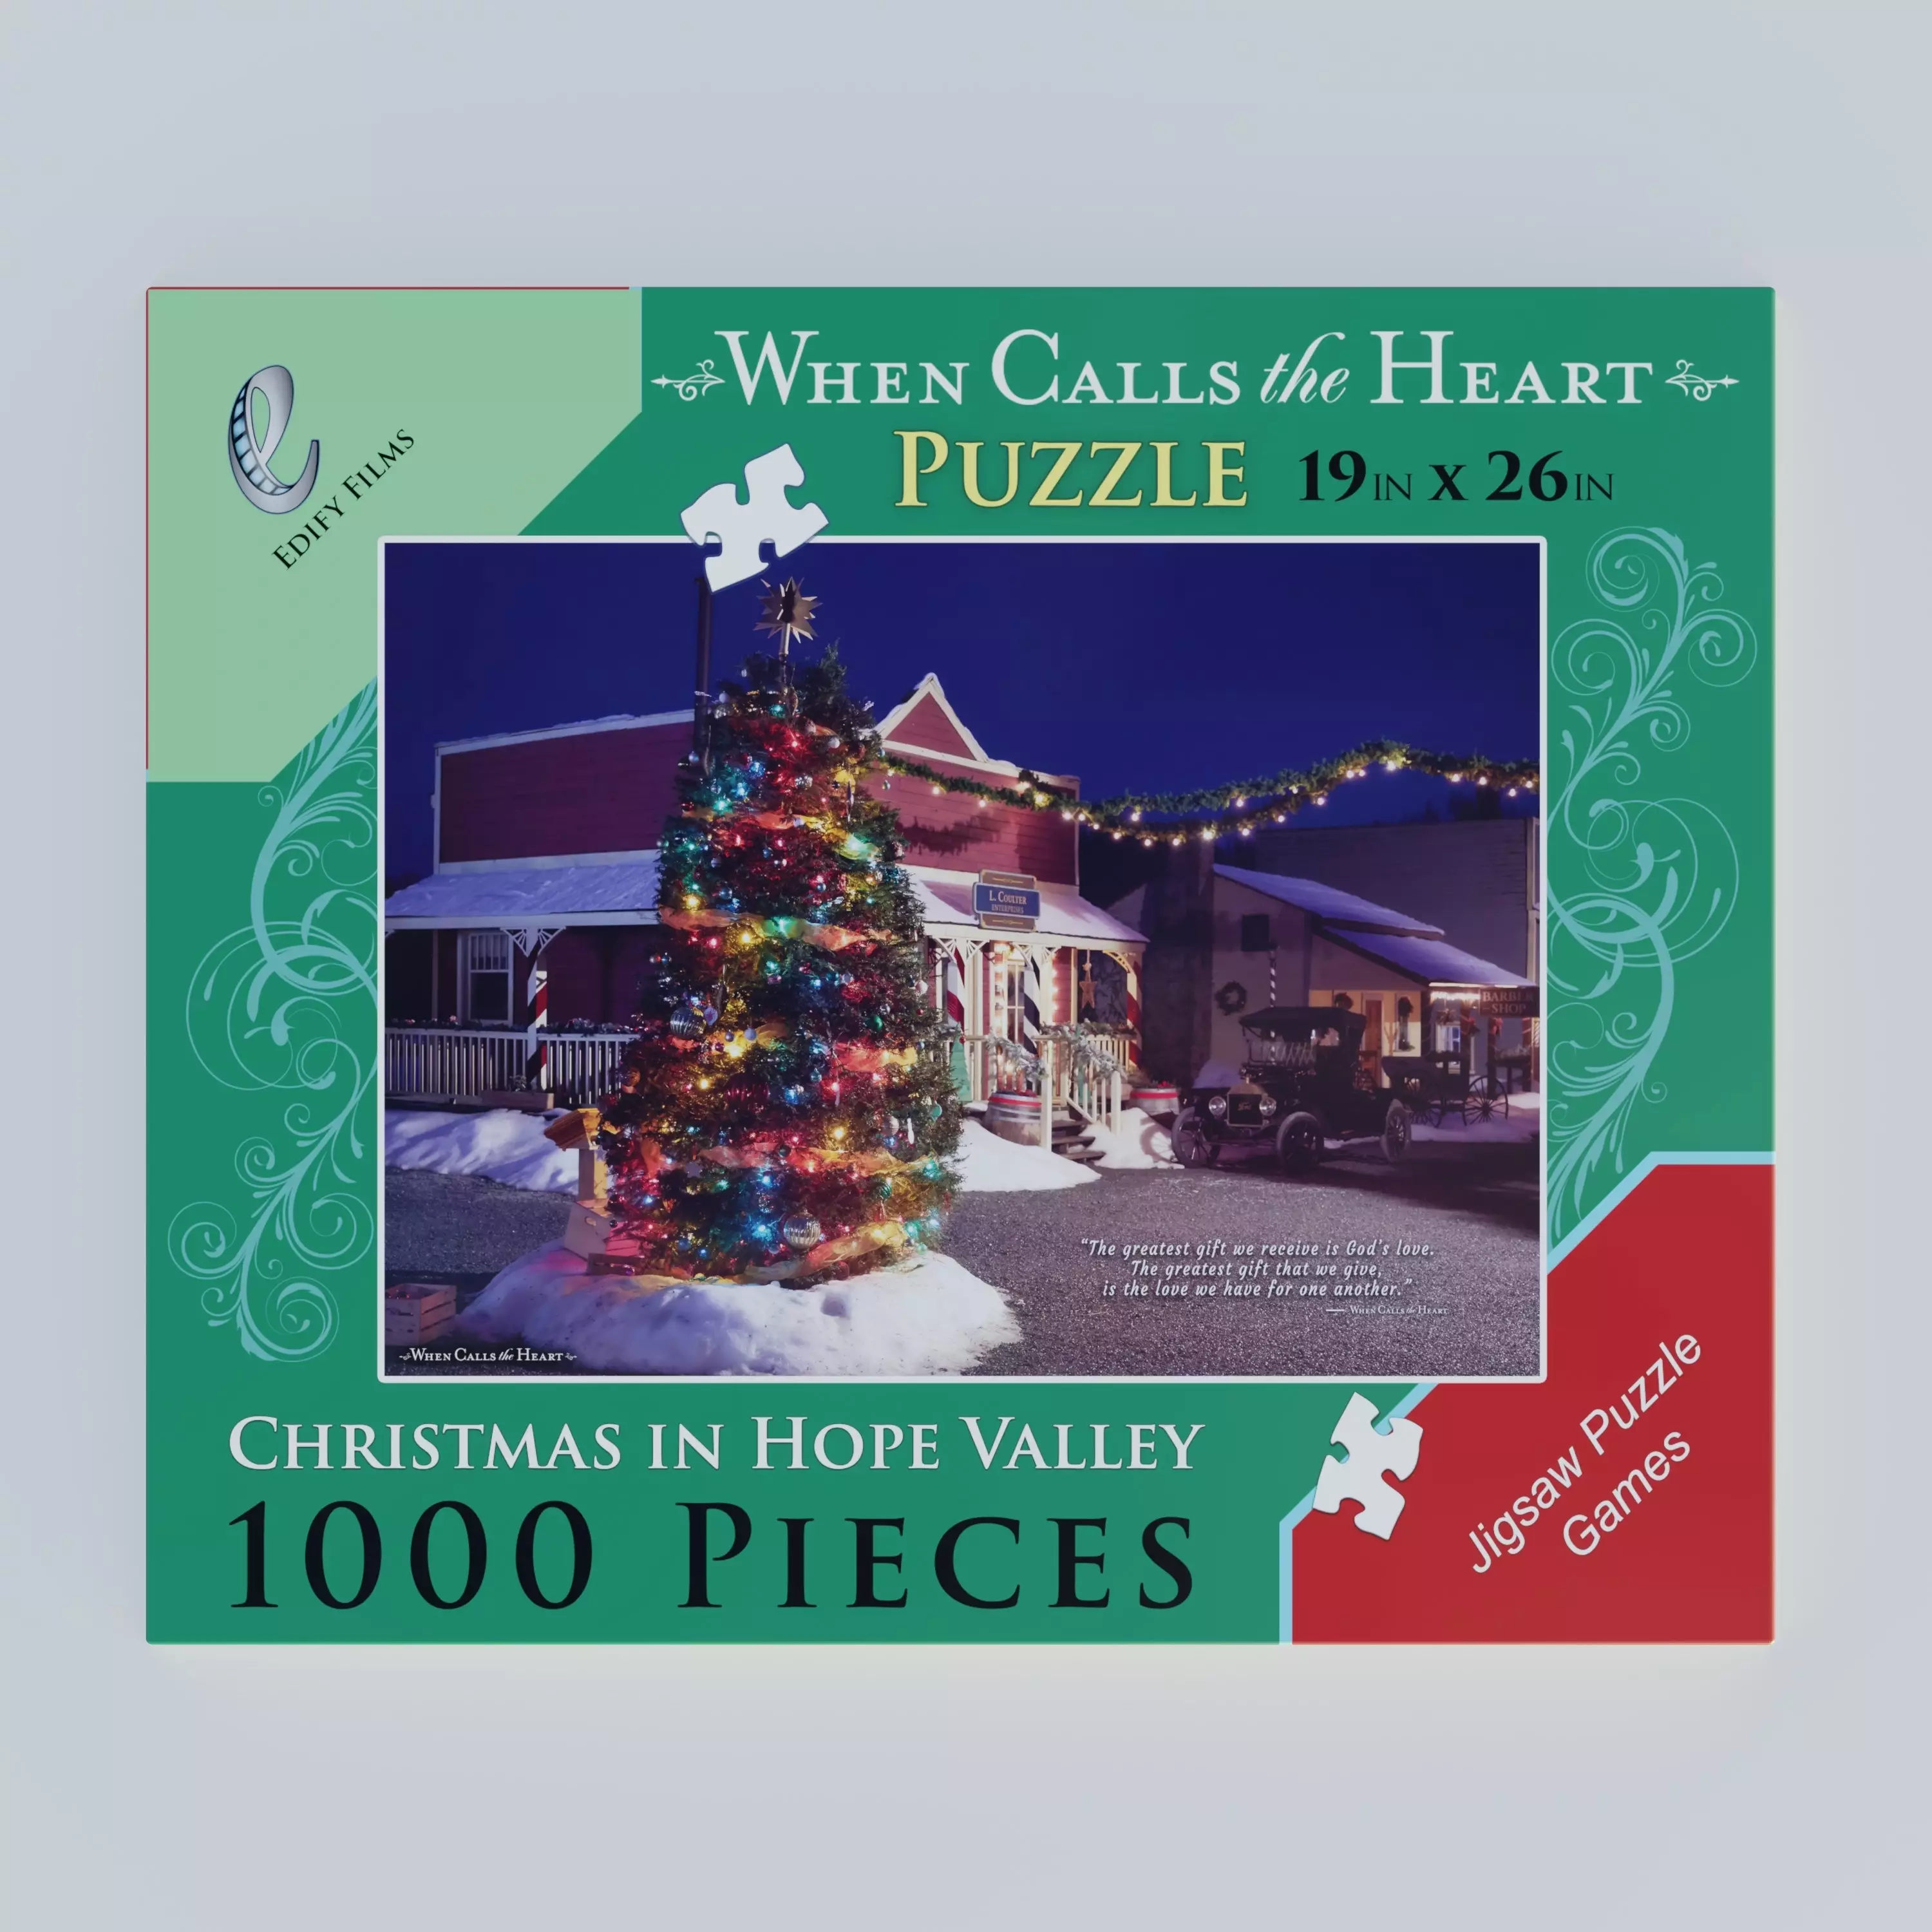 When Calls the Heart, Christmas in Hope Valley Puzzle